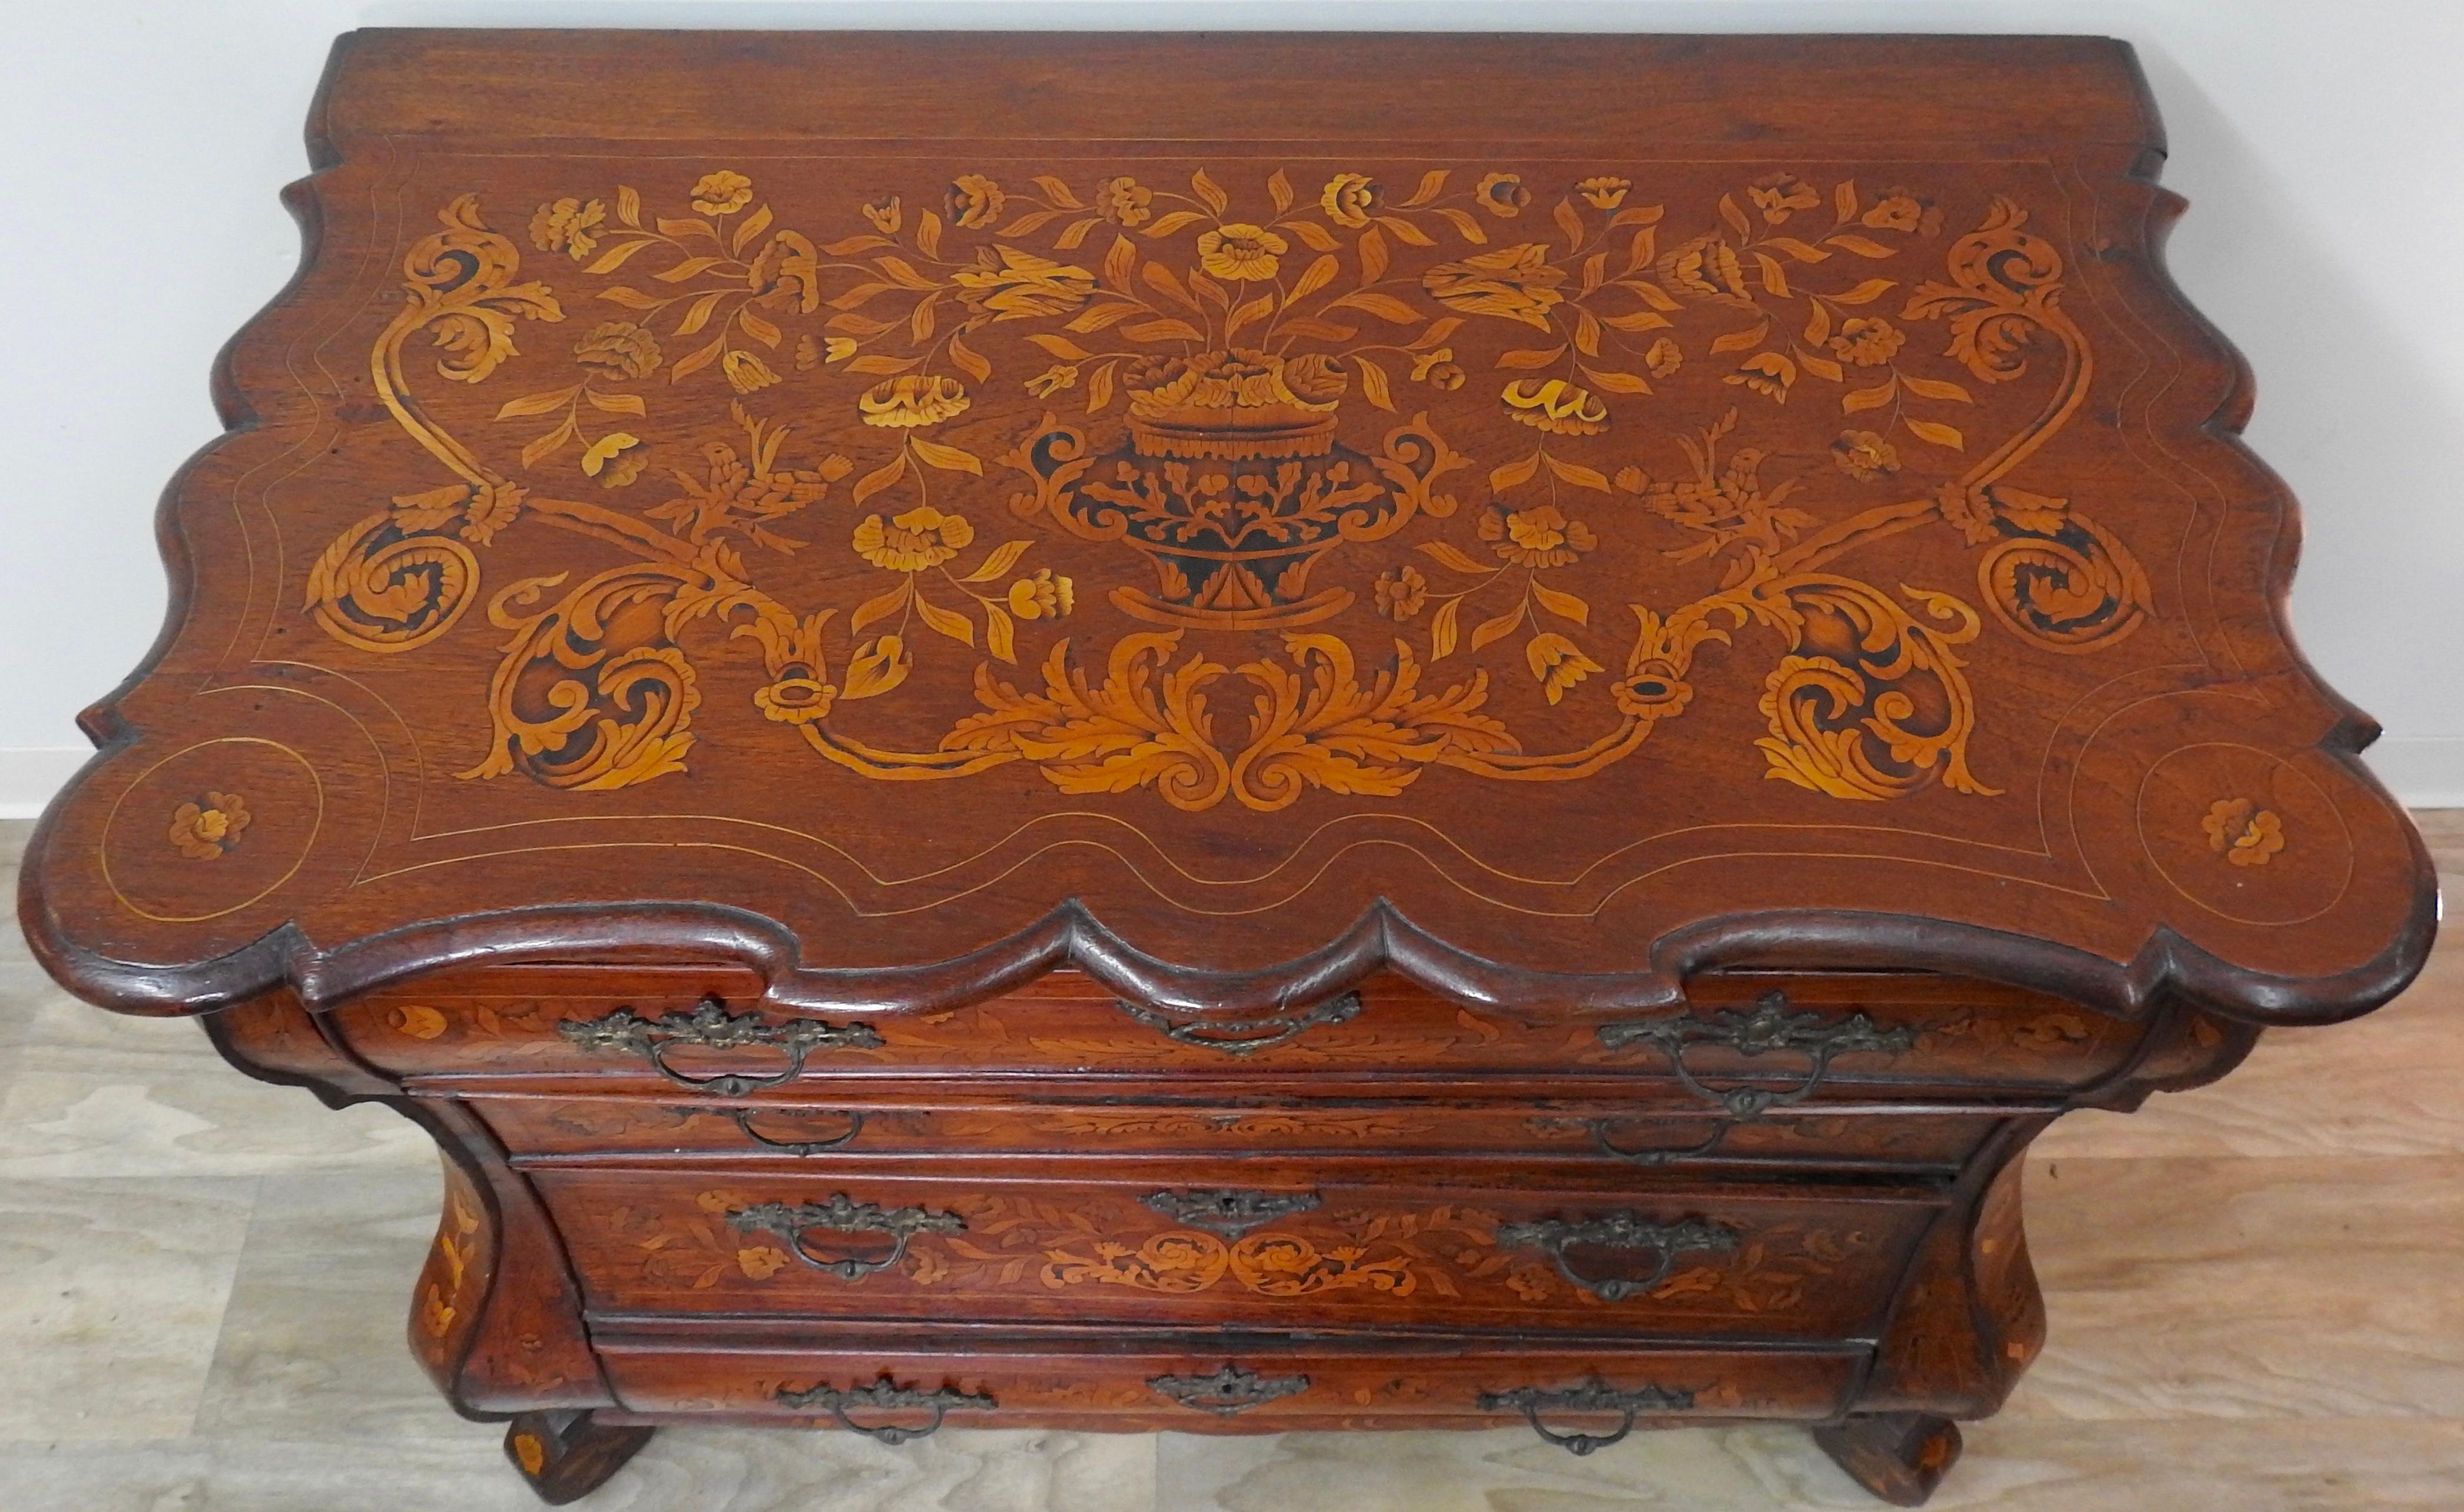 Mid-18th century Dutch walnut bombe' front commode. Beautiful inlay work on this gorgeous piece is Impeccable!!! The chest has a unique base that is reminiscent of a bracket foot but they turned it. The serpentine front is unusual as well by having